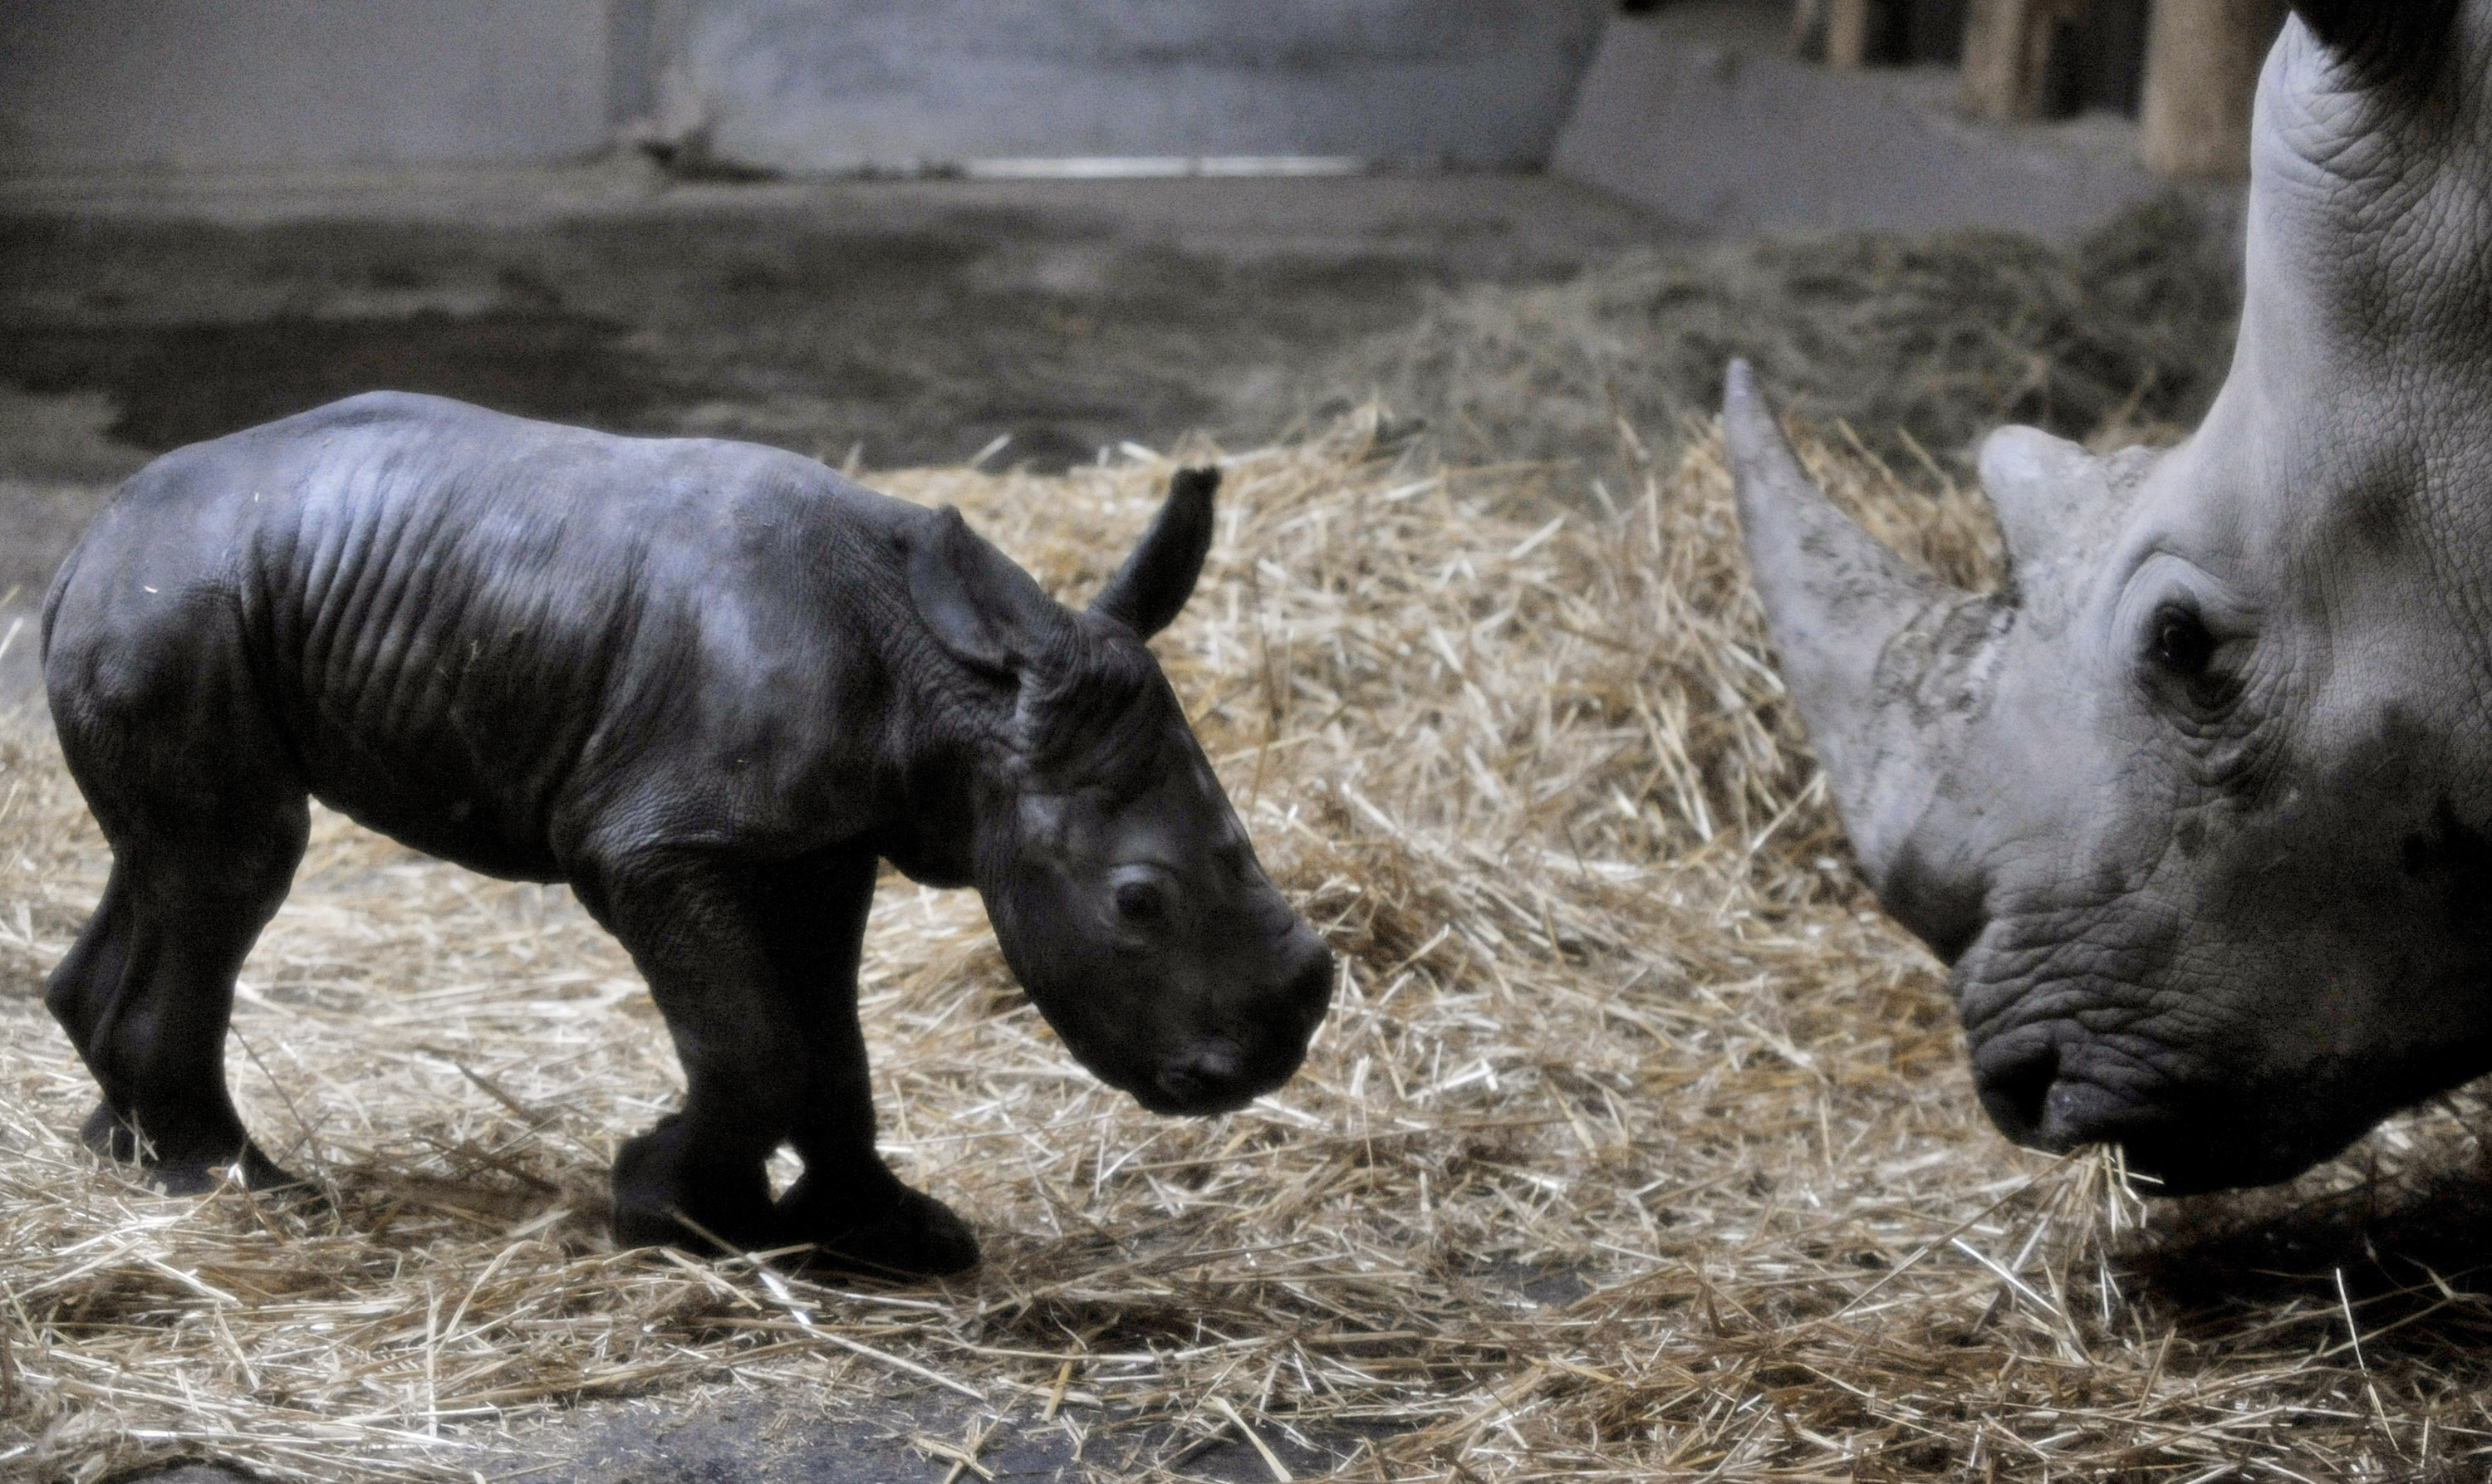 The white rhino baby and his mother in the Budapest Zoo. The rhino was conceived using artificial insemination and â��cryopreservedâ�� rhino sperm. (Bela Szandelszky)